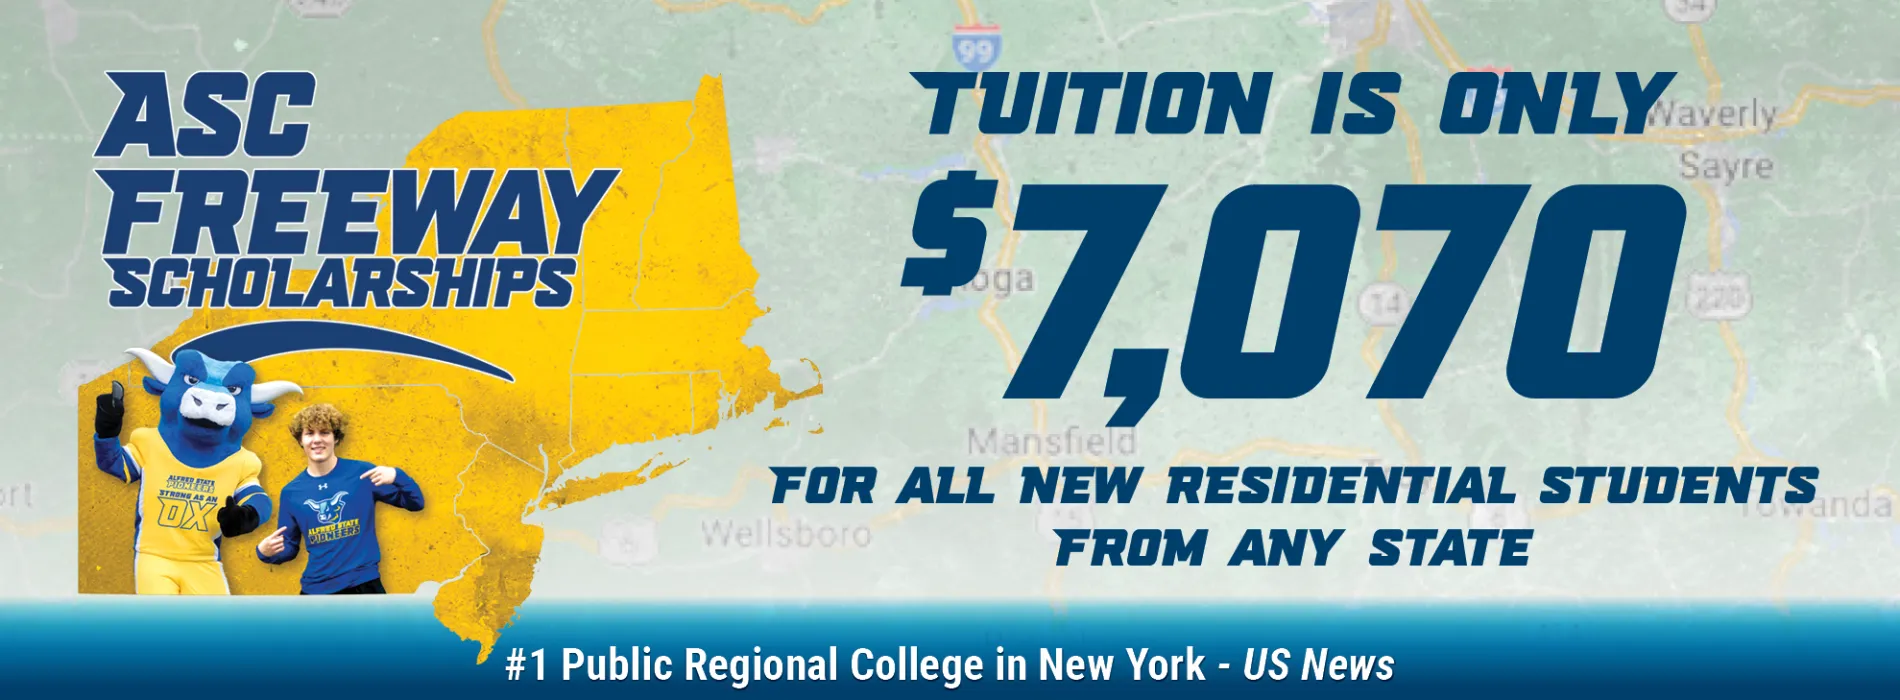 ASC Freeway scholarships. Tuition is only $7,070 for all new residential students from any state. #1 public regional college in New York - US News